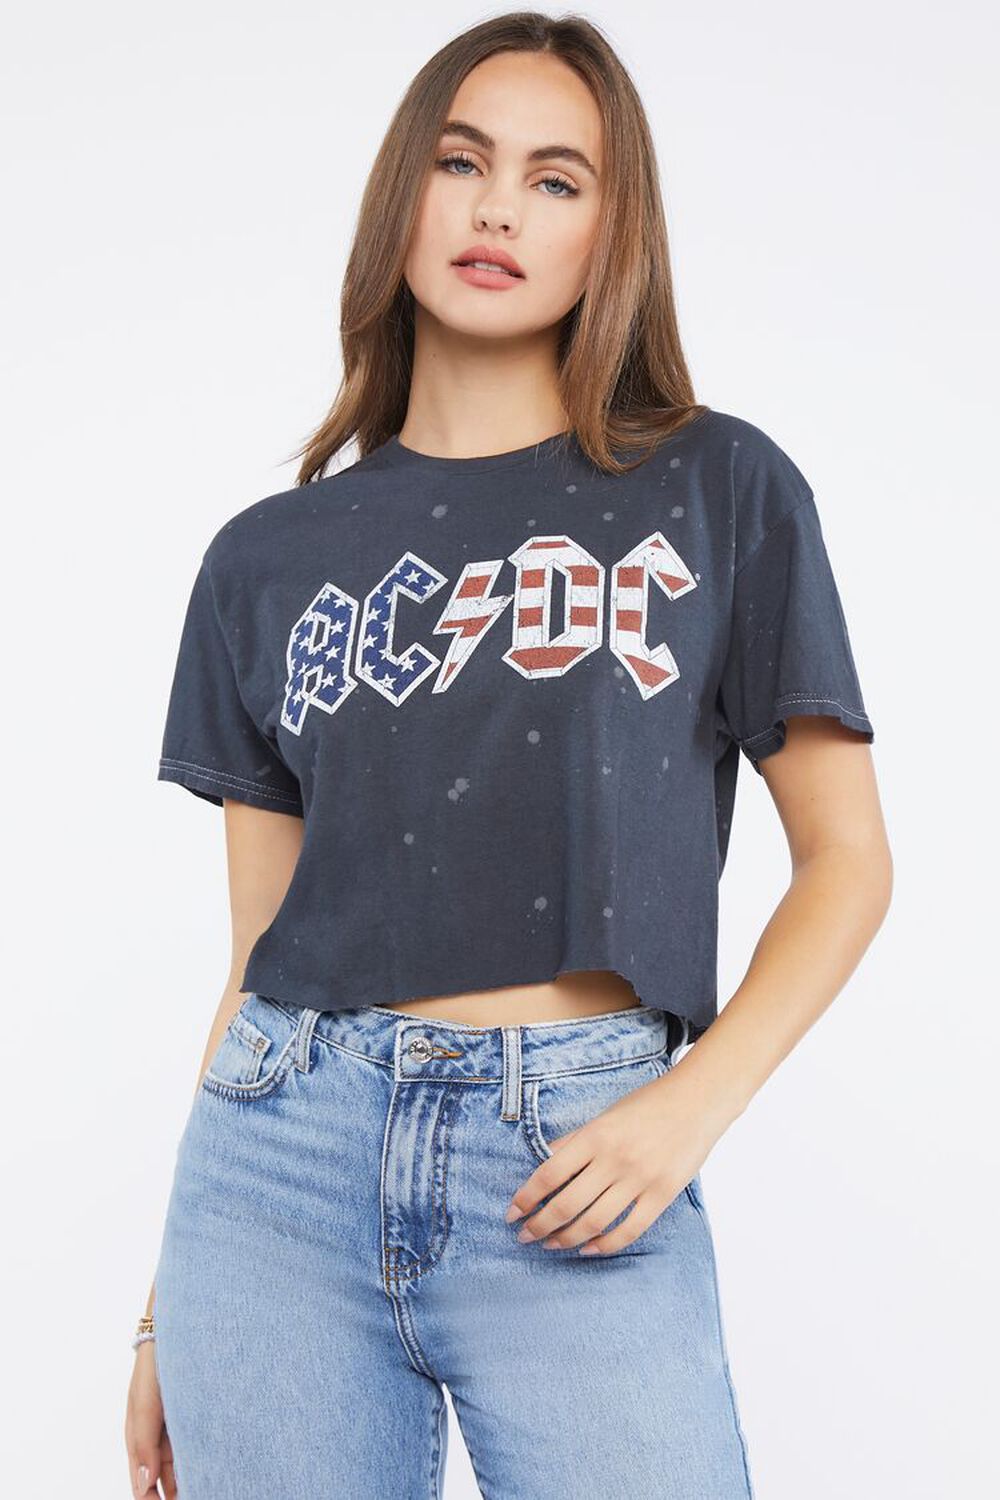 ACDC Tour Graphic Cropped Tee